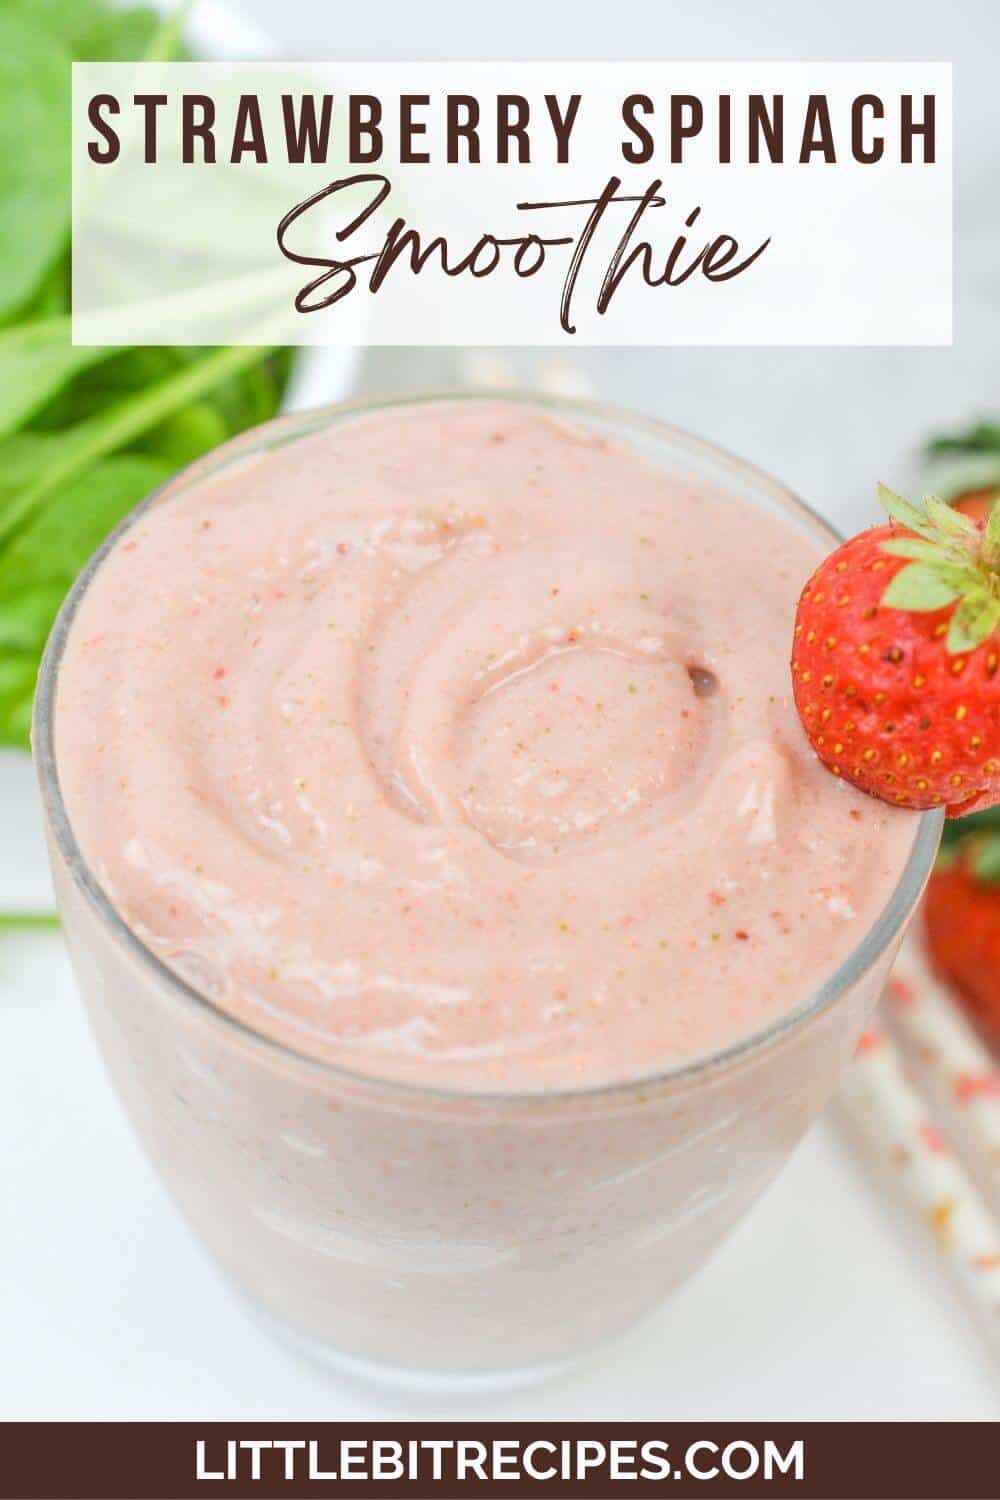 strawberry spinach smoothie with text.